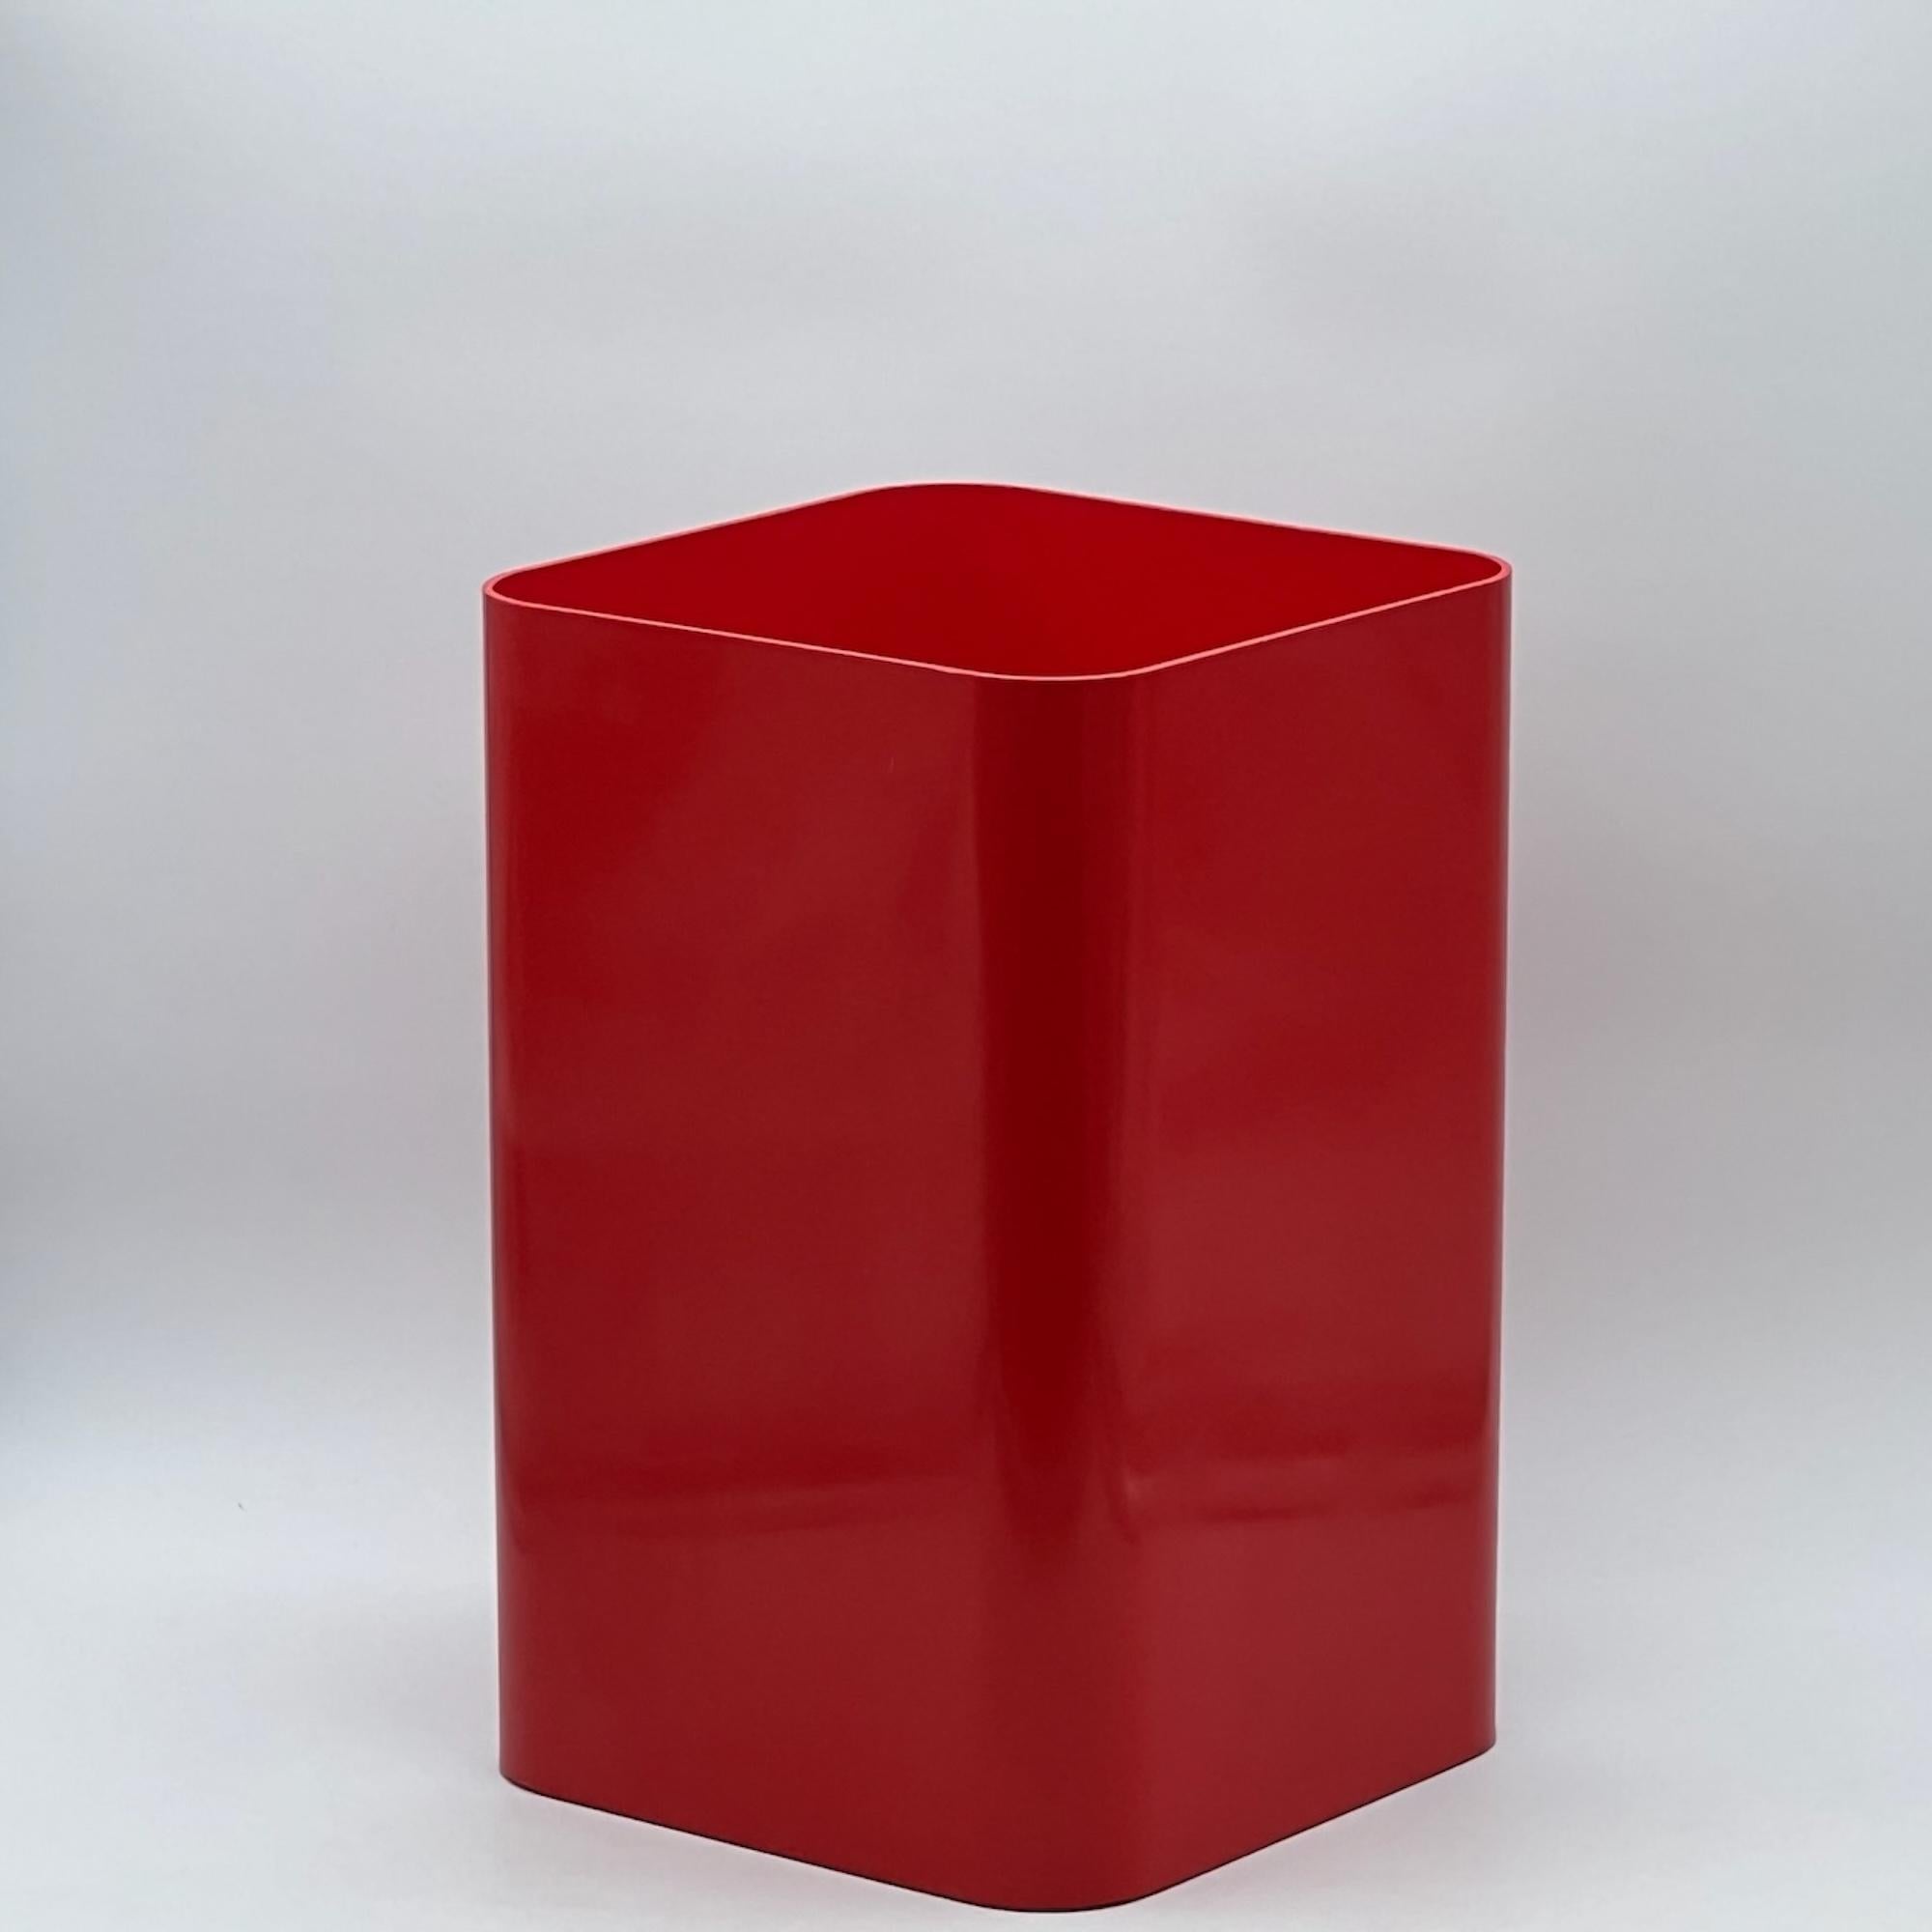 Industrial Kartell 4672: Iconic 70s Paper Basket by Ufficio Tecnico-Vibrant Red Glossy 